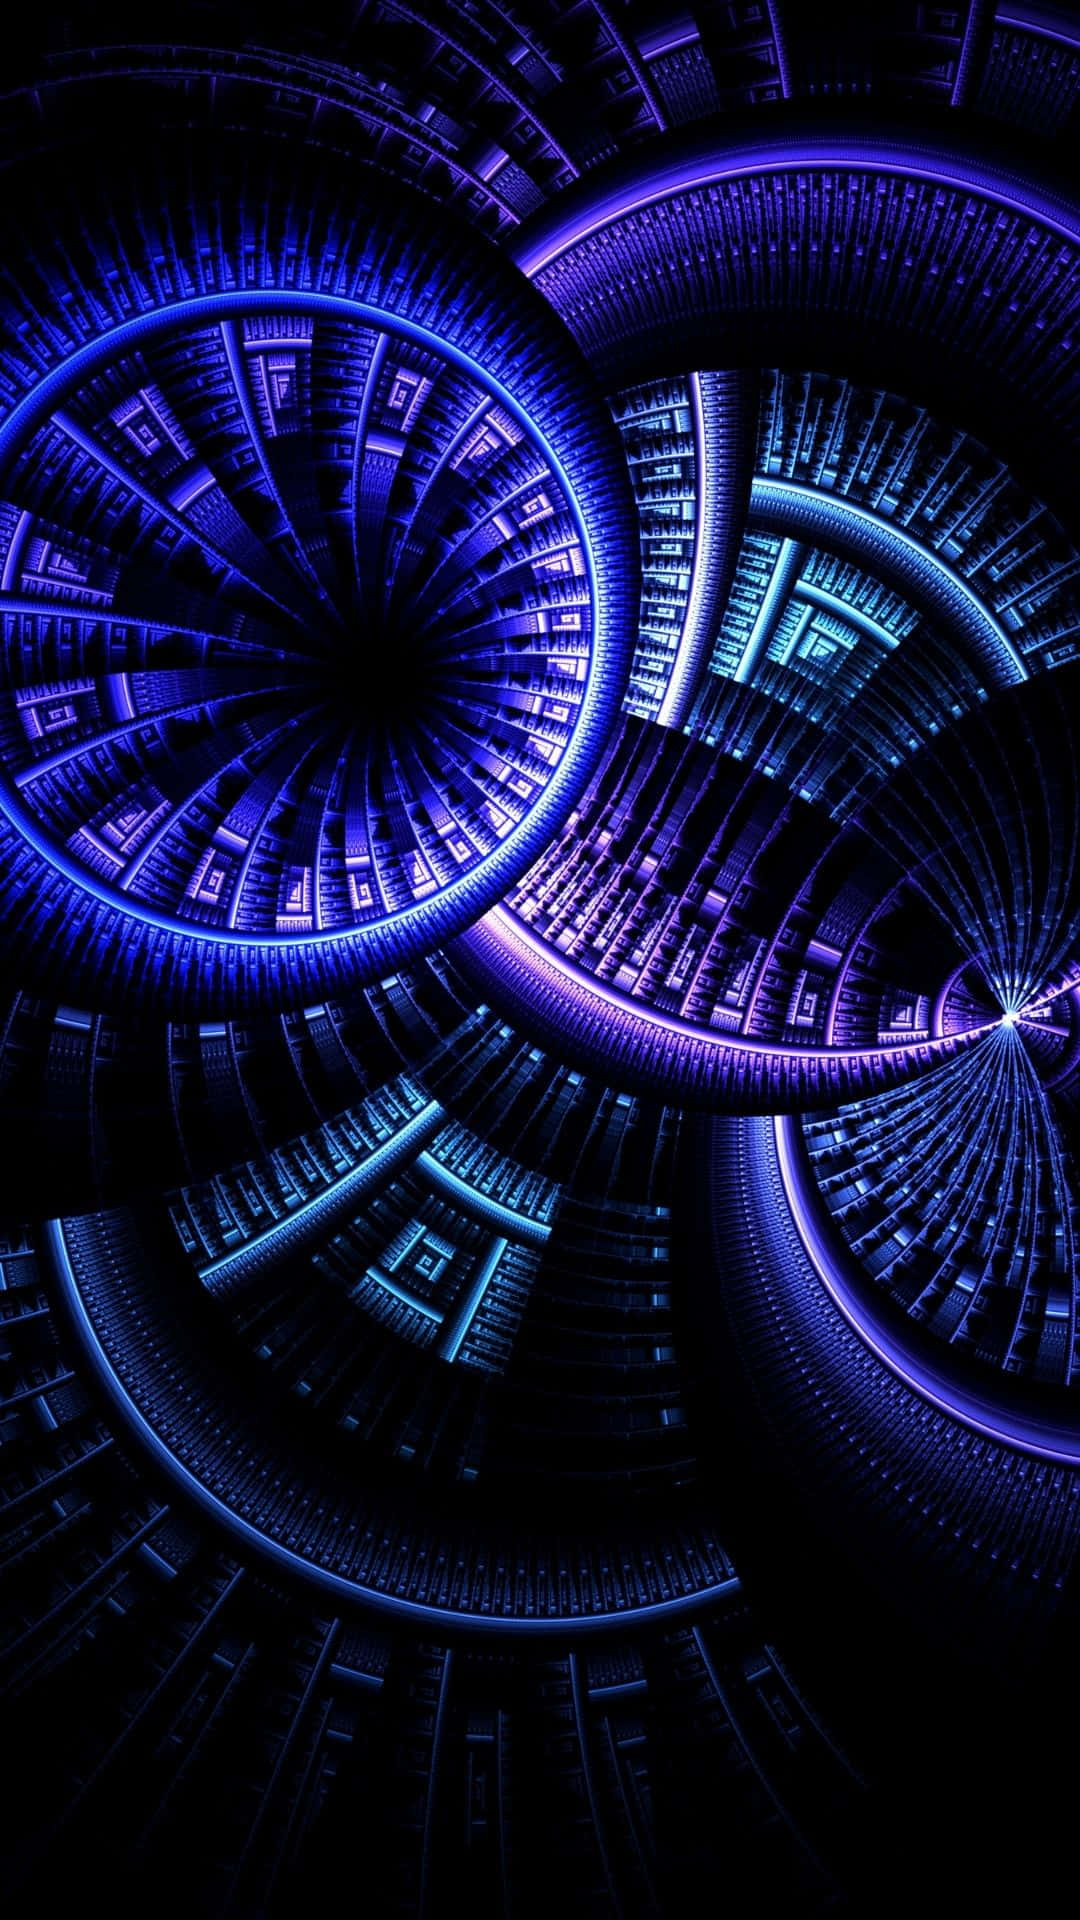 A Blue And Purple Abstract Background With A Spiral Design Background